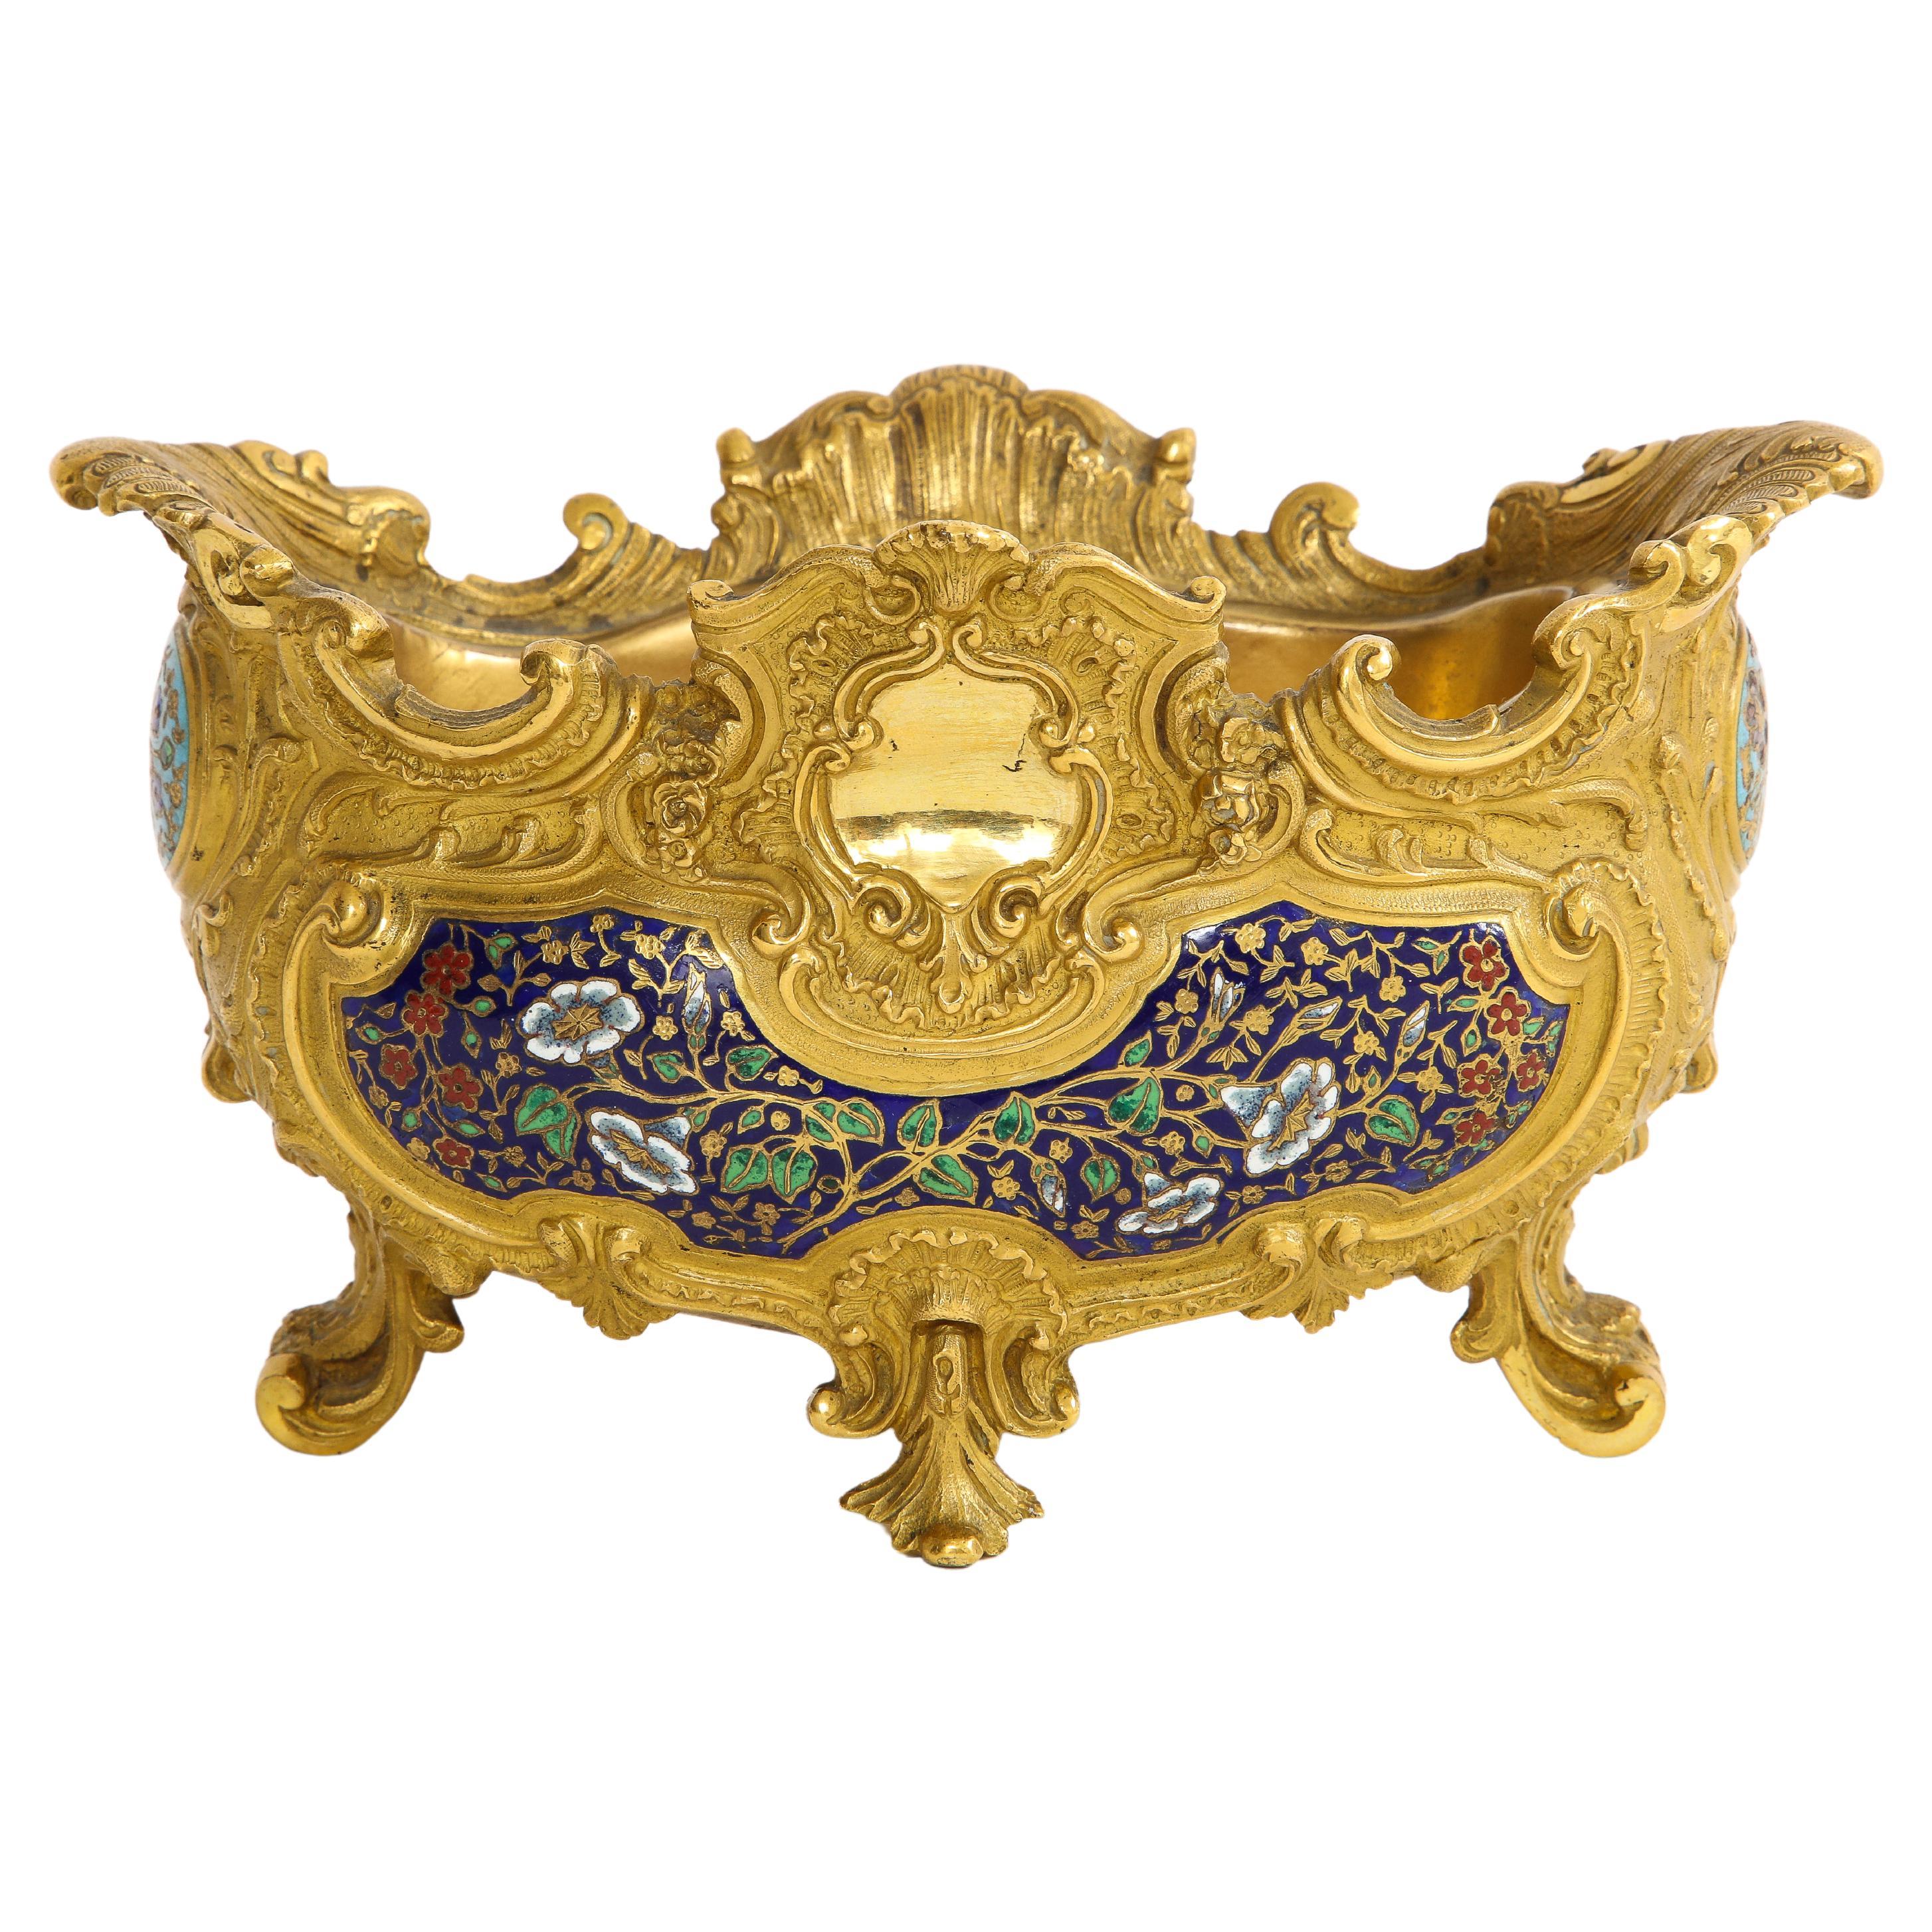 A 19th C. French Ormolu Champlevé Enamel Footed Centerpiece, Att. Barbedienne For Sale